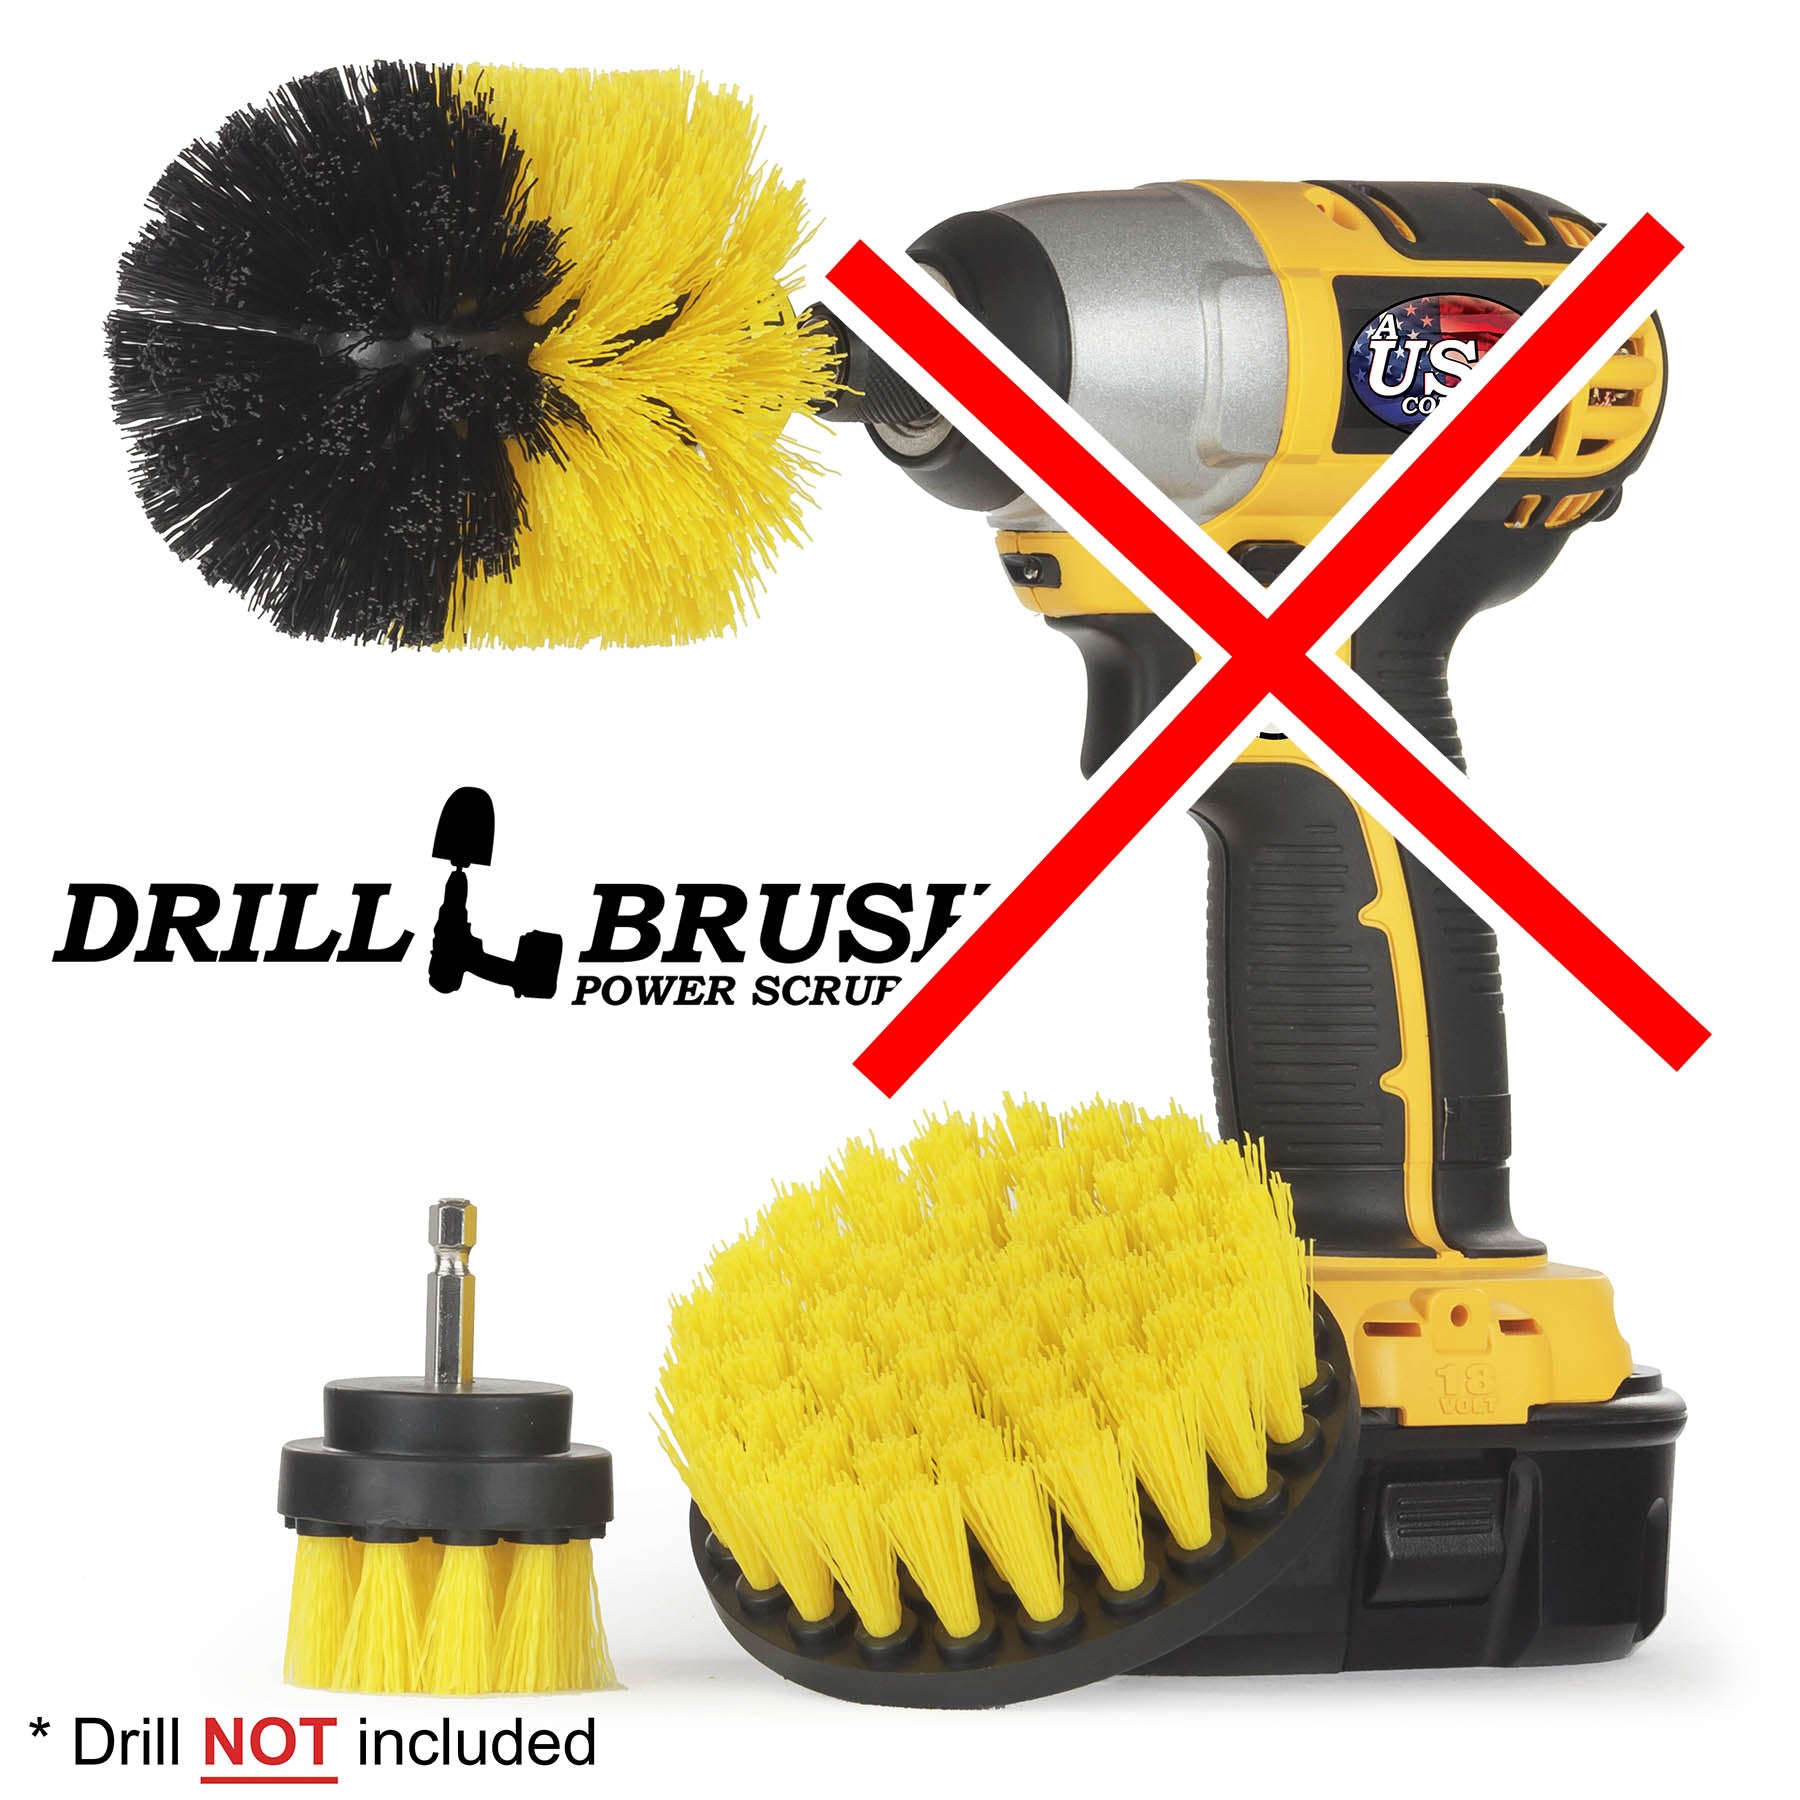 Experts Explain Why You Shouldn't Clean With a Drill